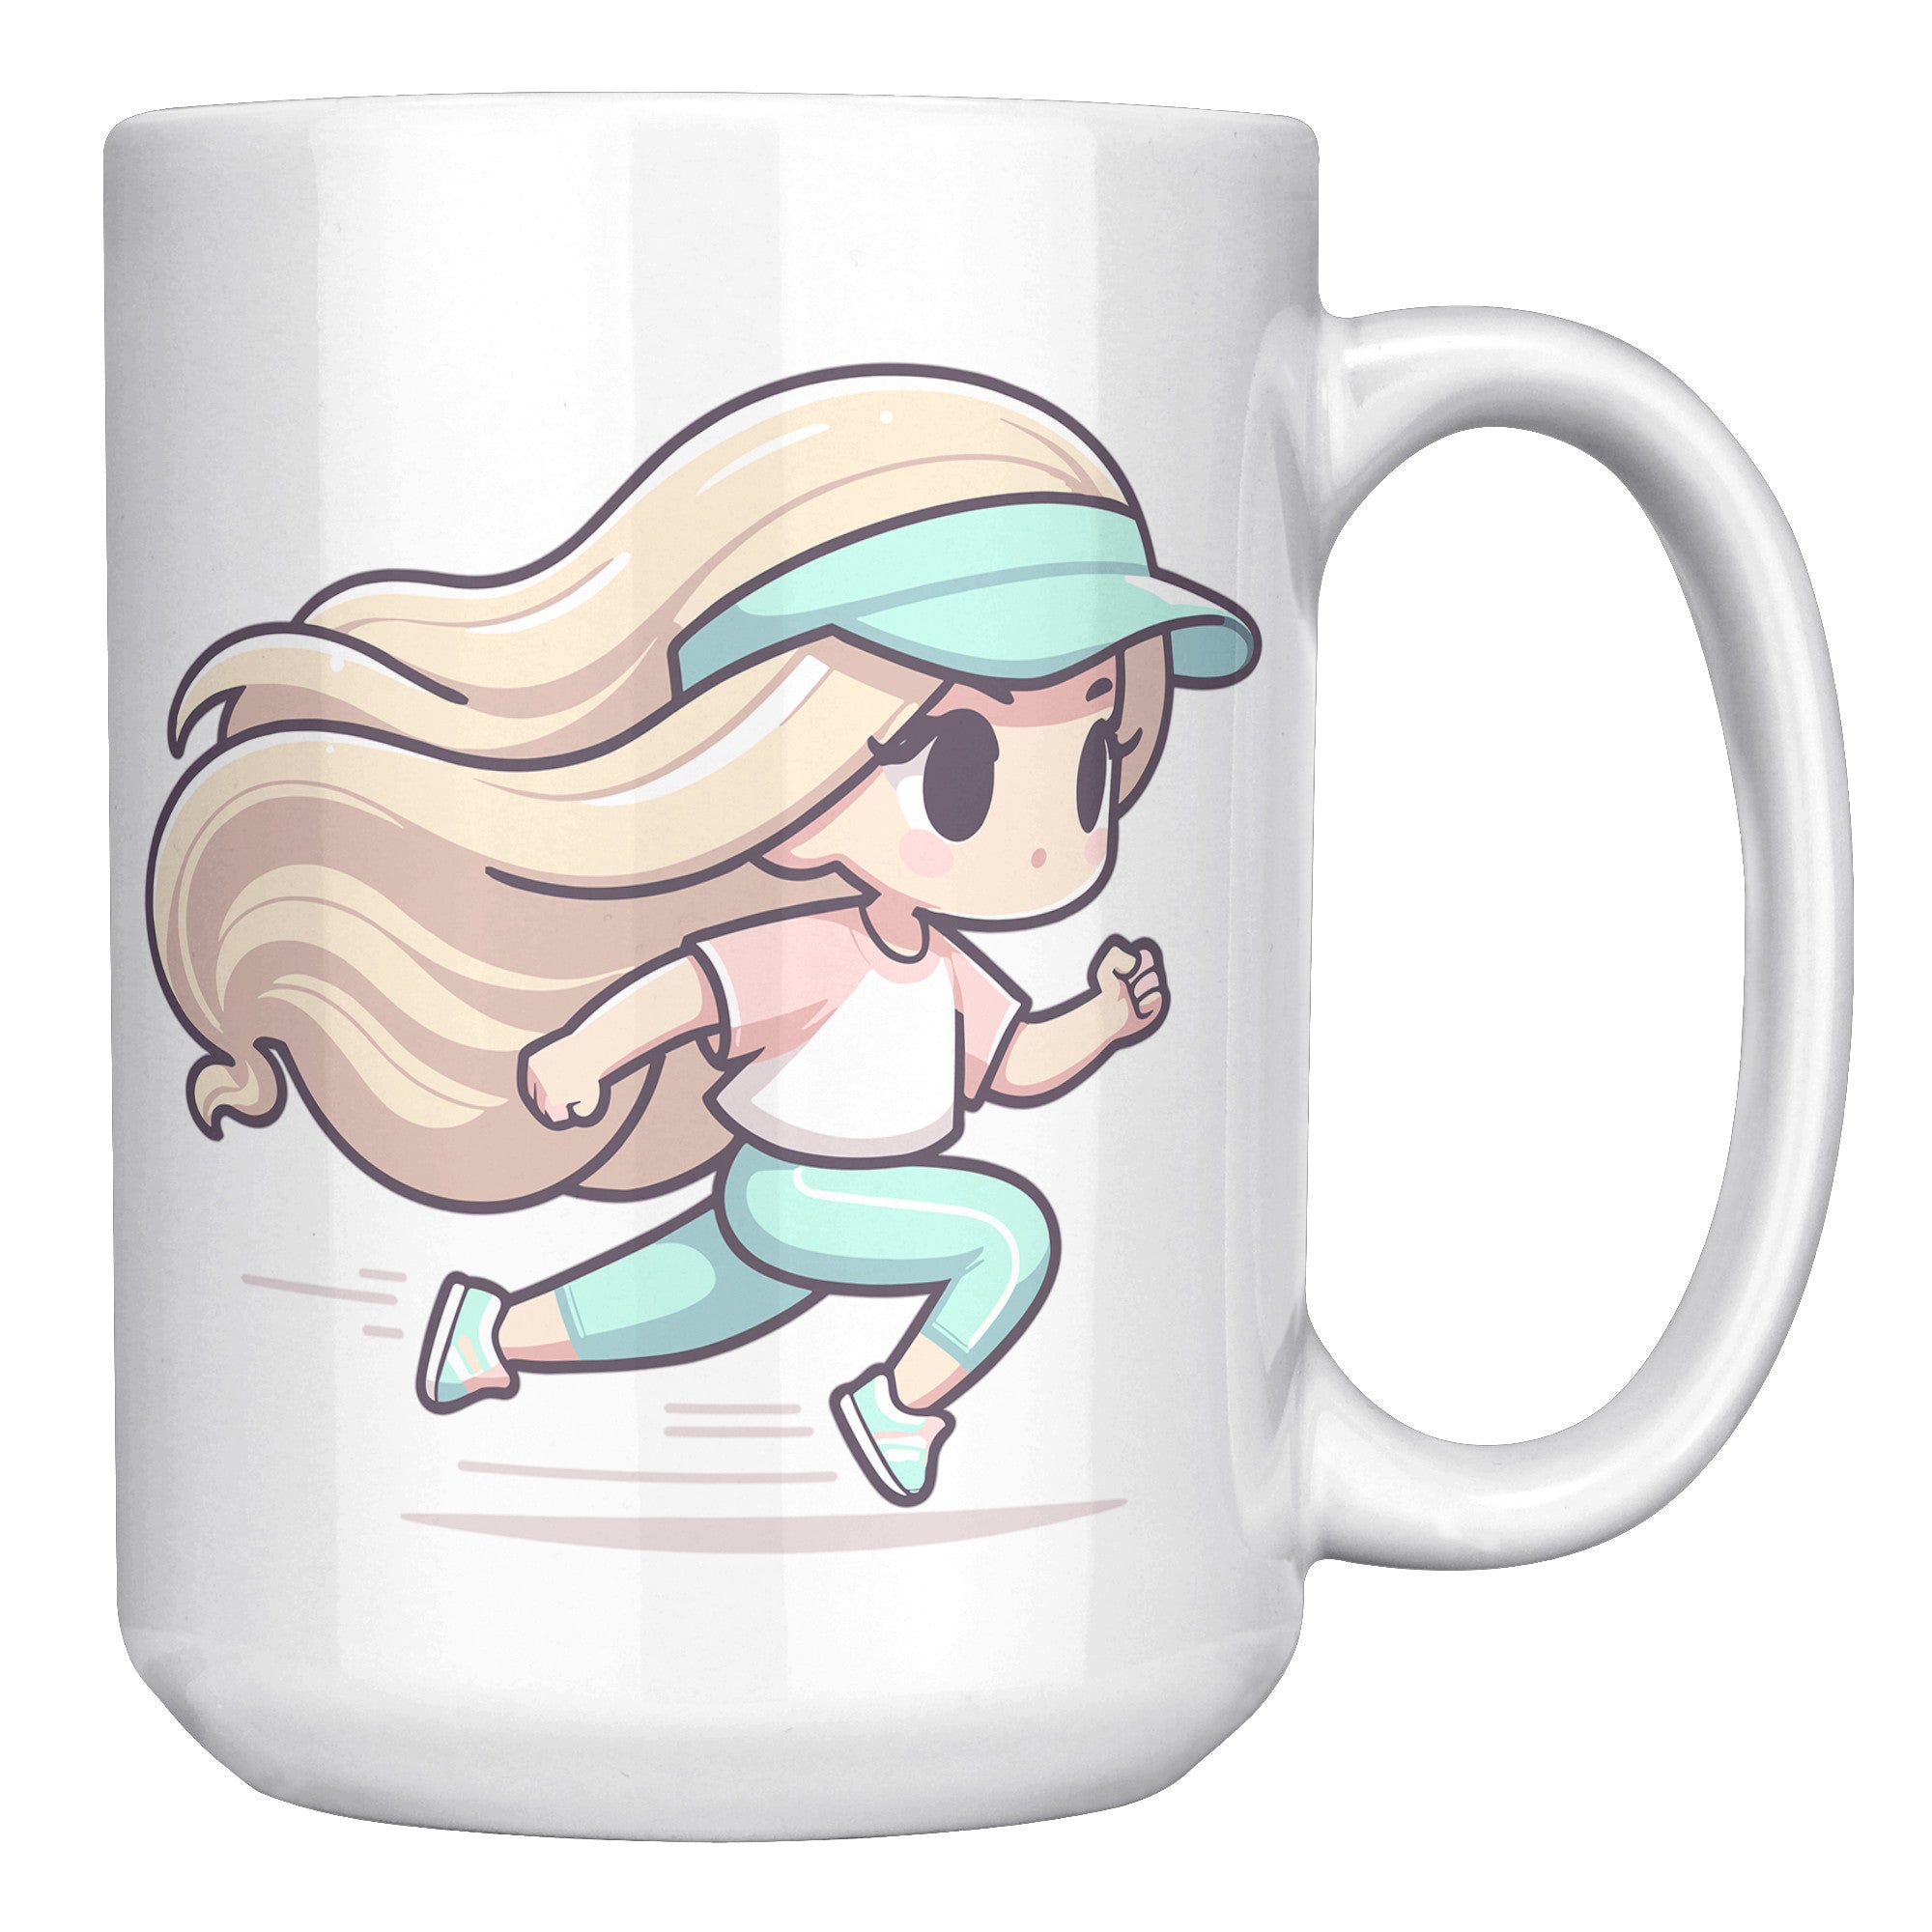 "Female Runner Coffee Mug - Inspirational Running Quotes Cup - Perfect Gift for Women Runners - Motivational Marathoner's Morning Brew" - R1